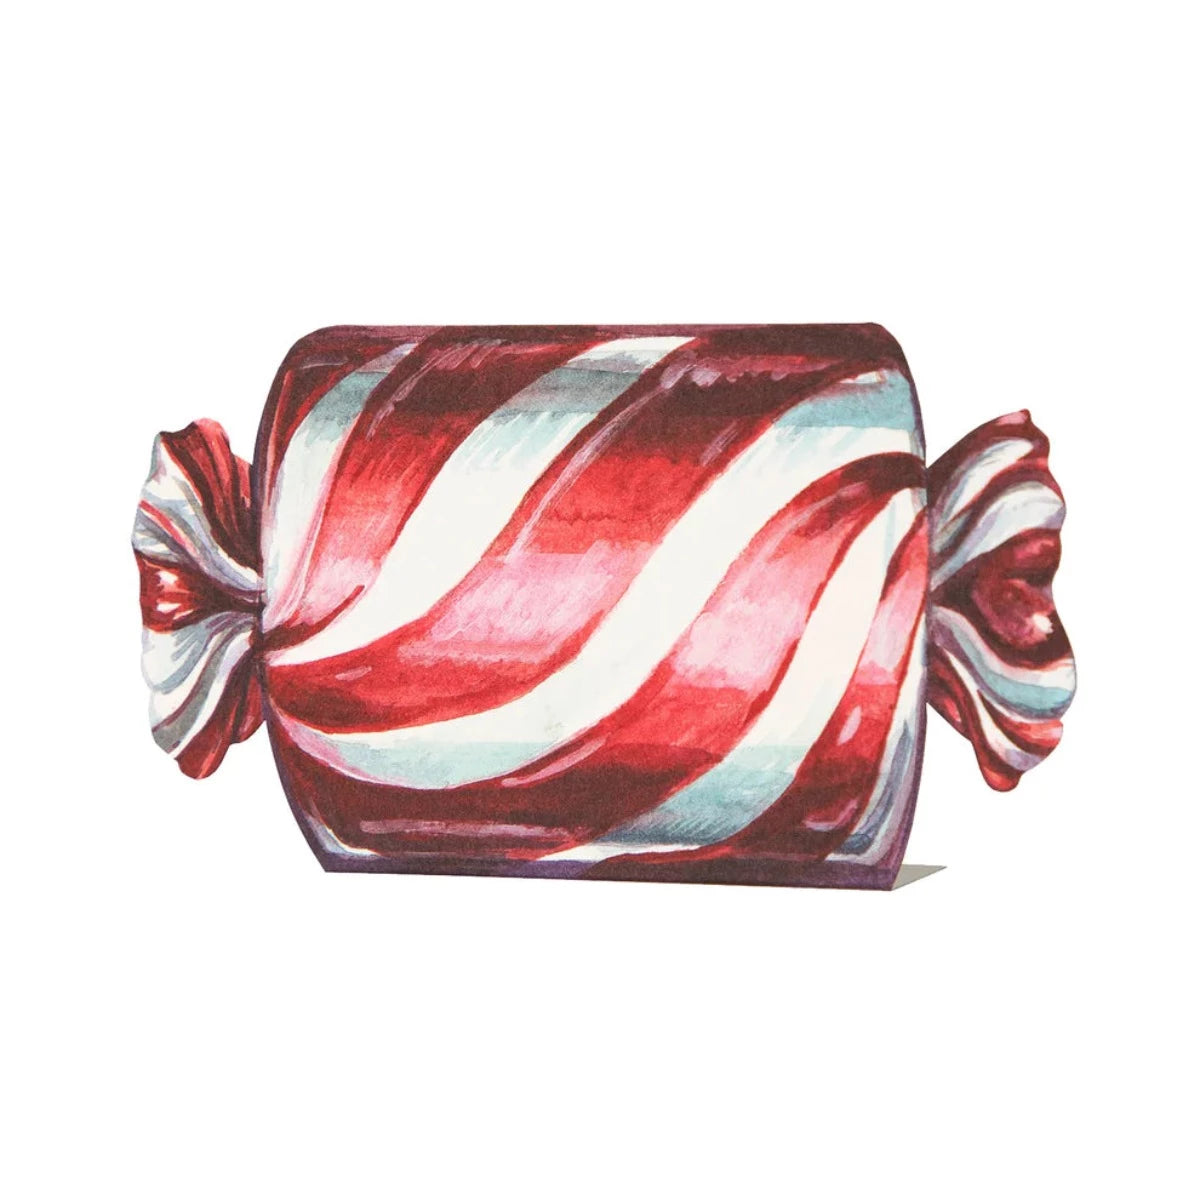 Christmas Candy Place Cards